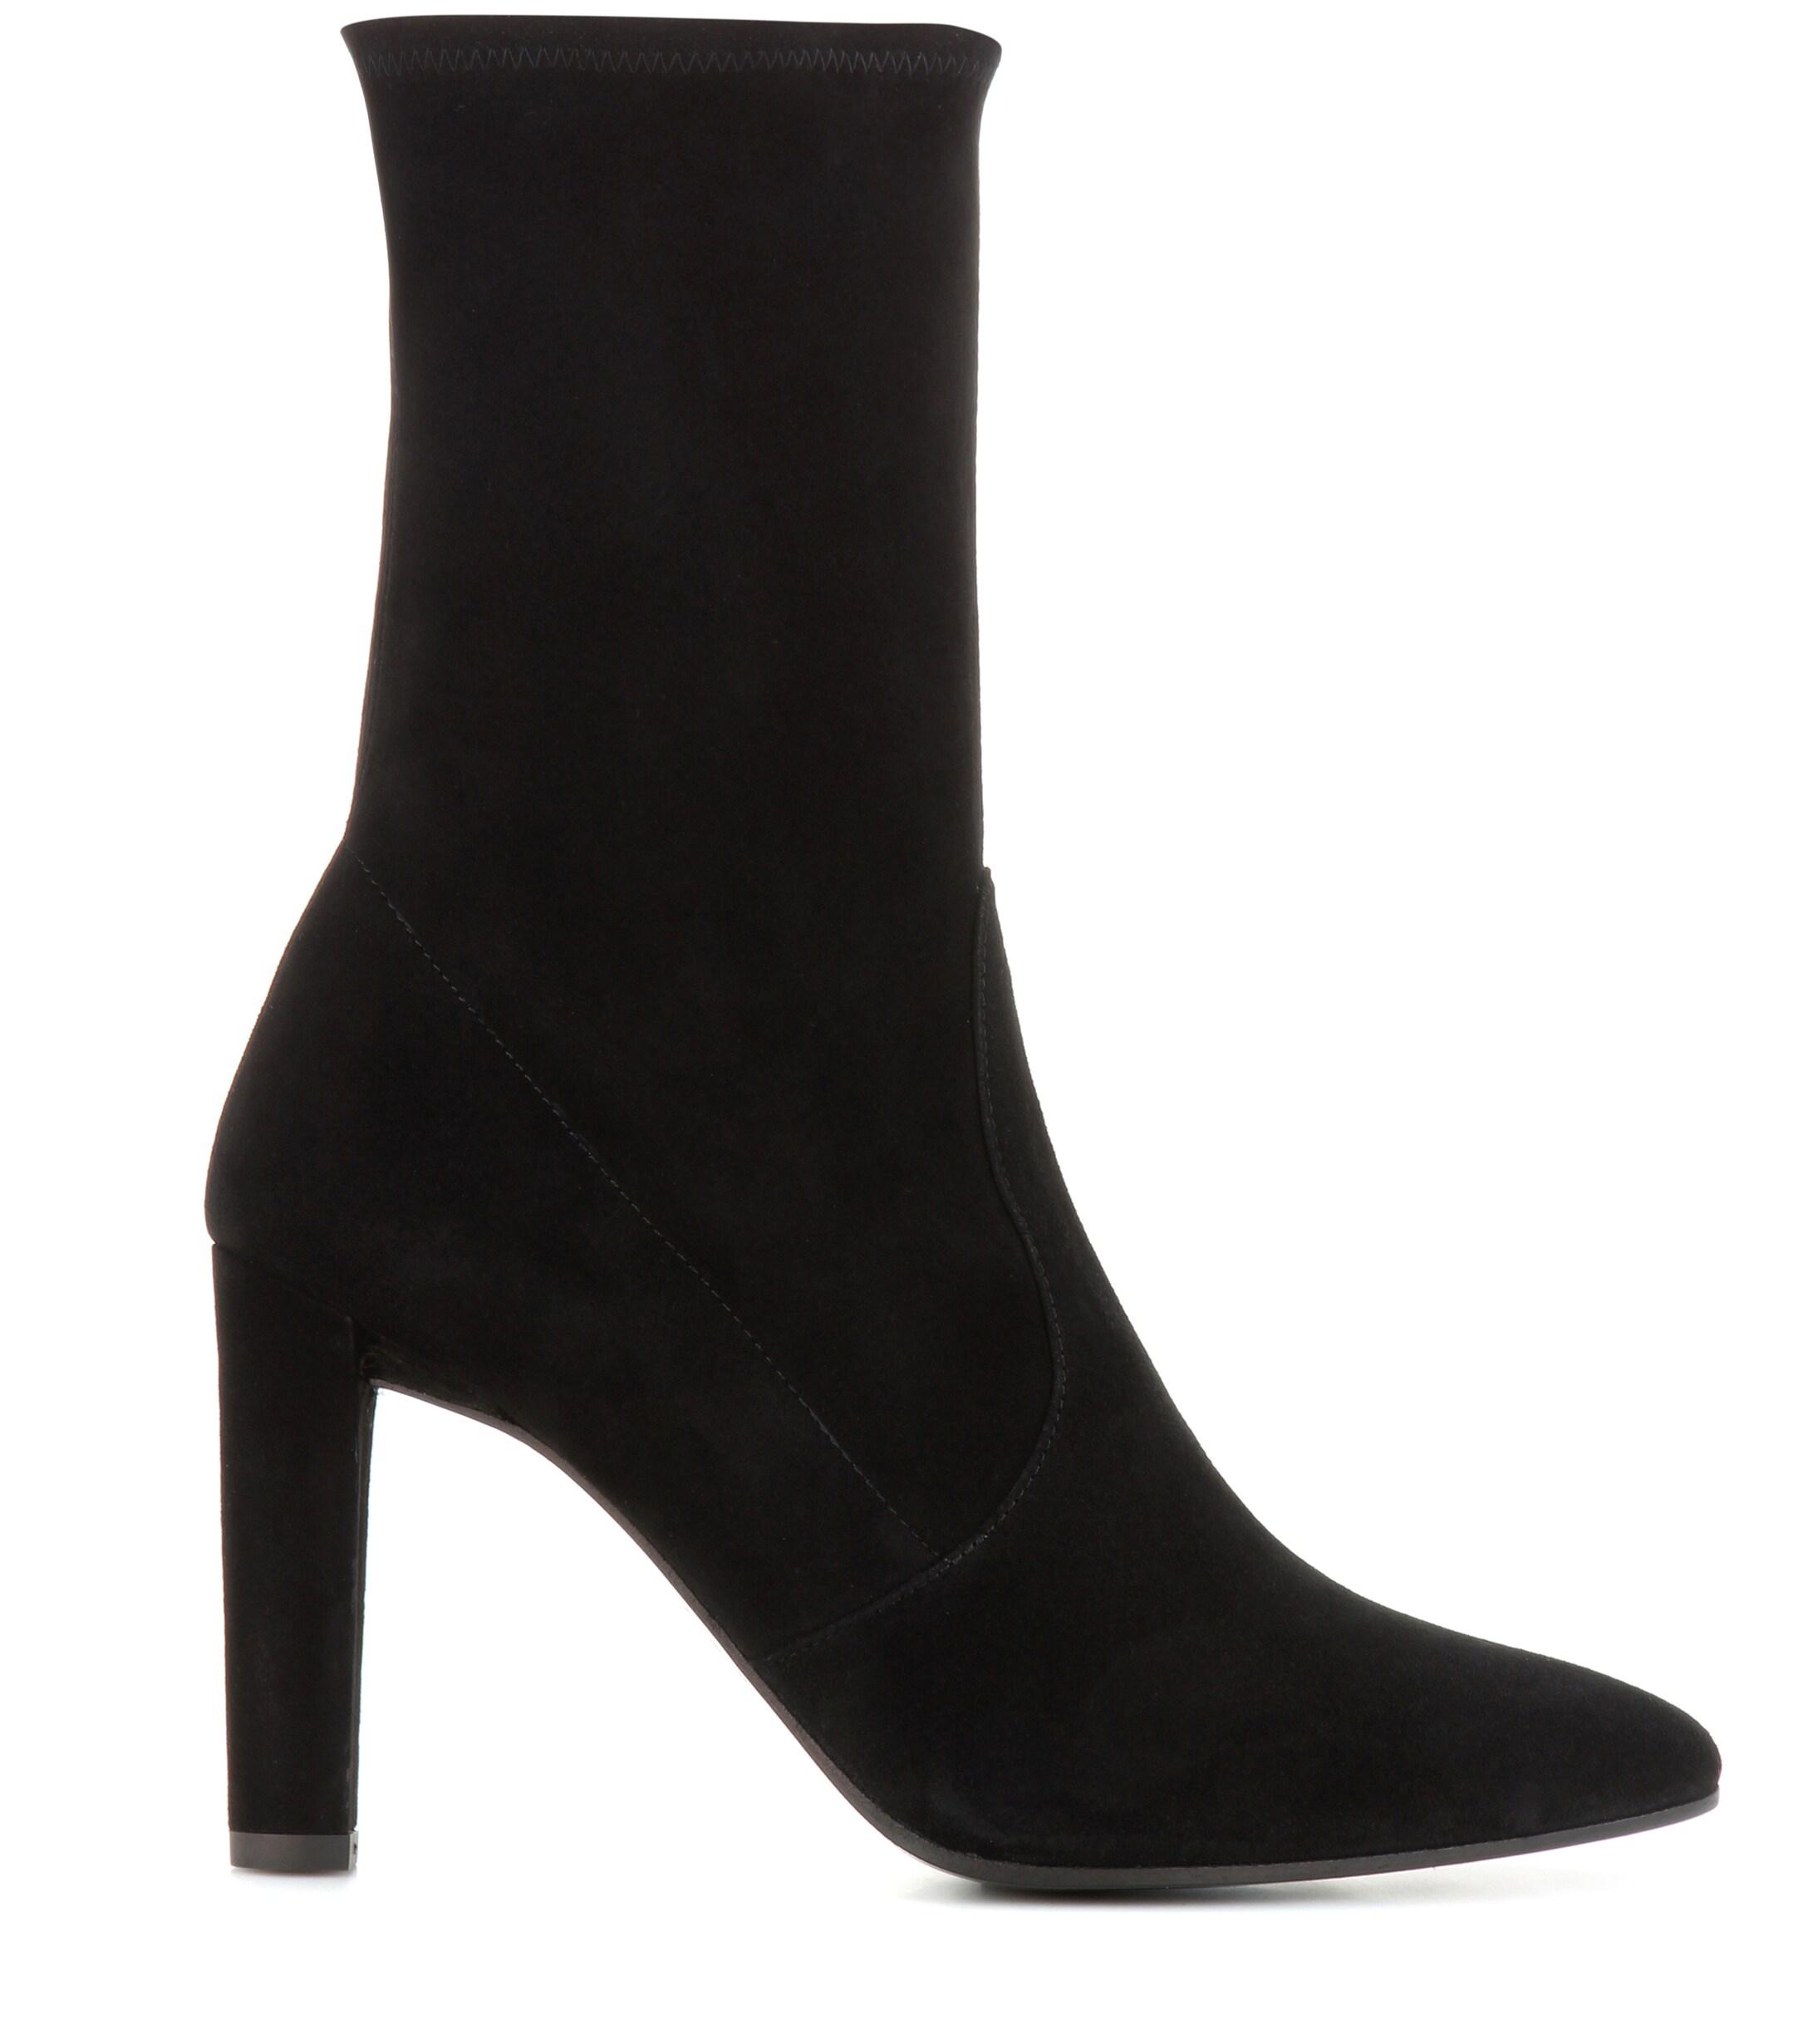 Stuart Weitzman Clinger Suede Ankle Boots in Black - Lyst